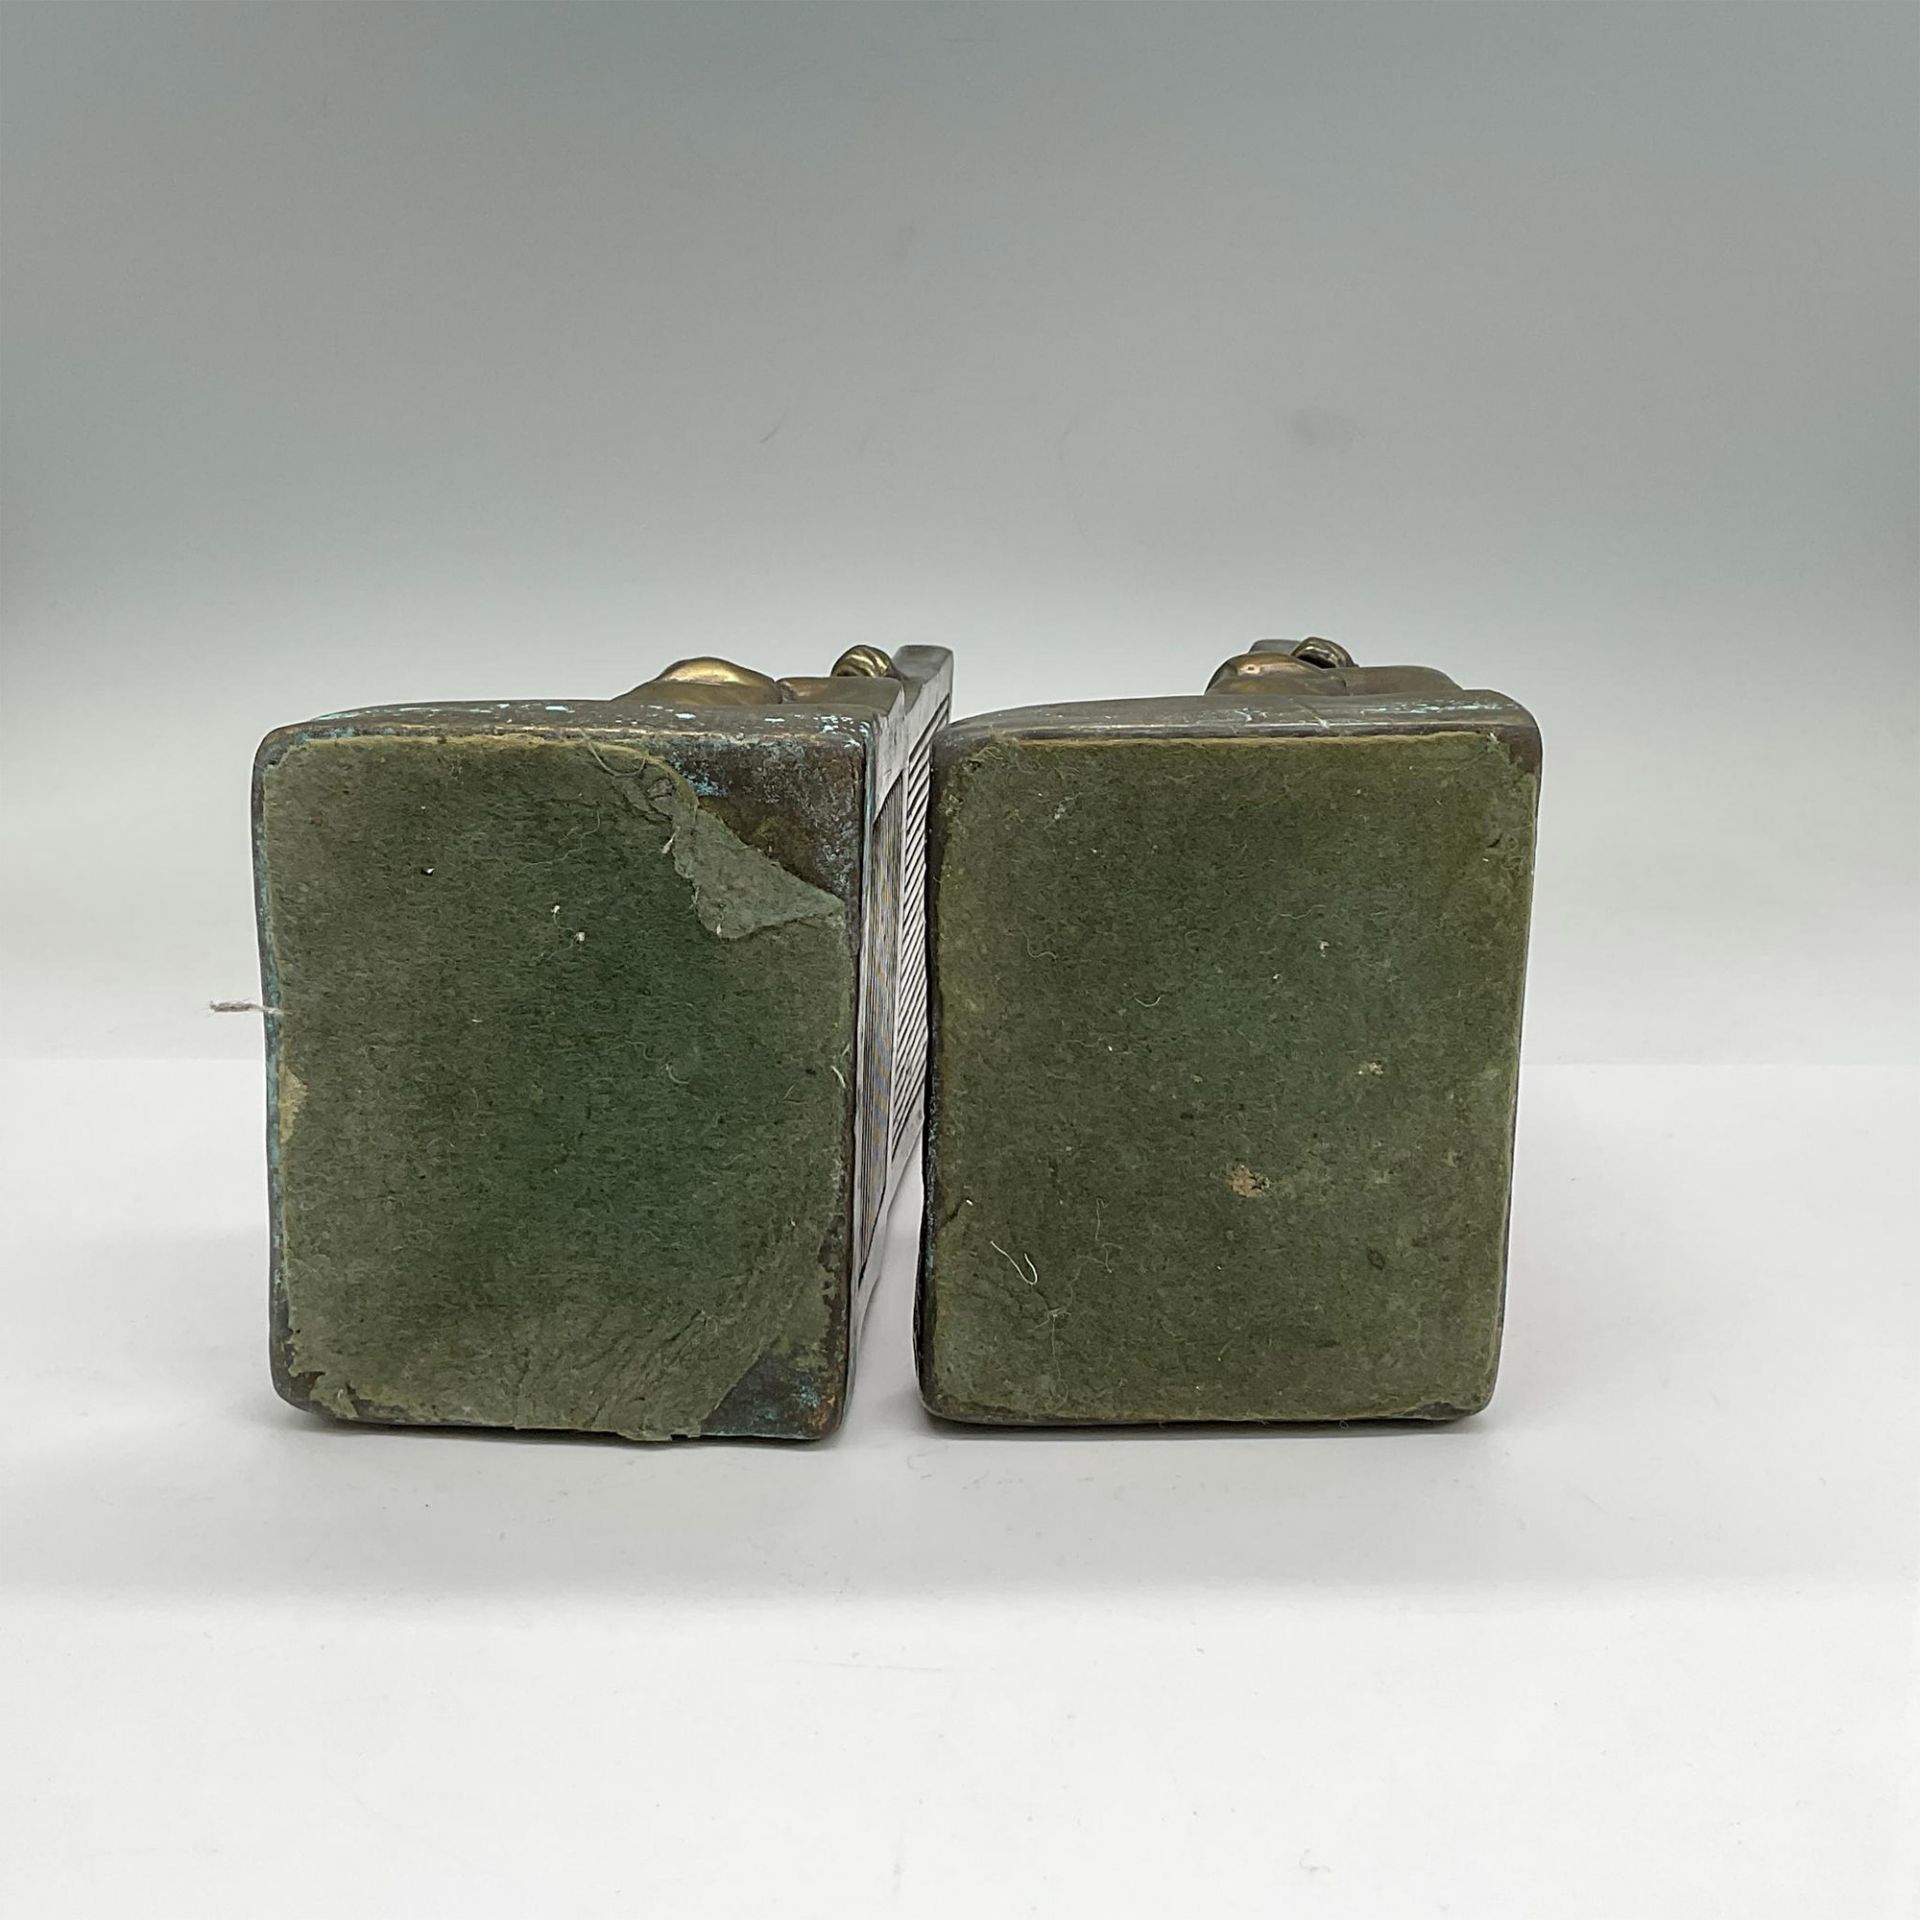 2pc Bronze Bookends, The Builder - Image 4 of 4